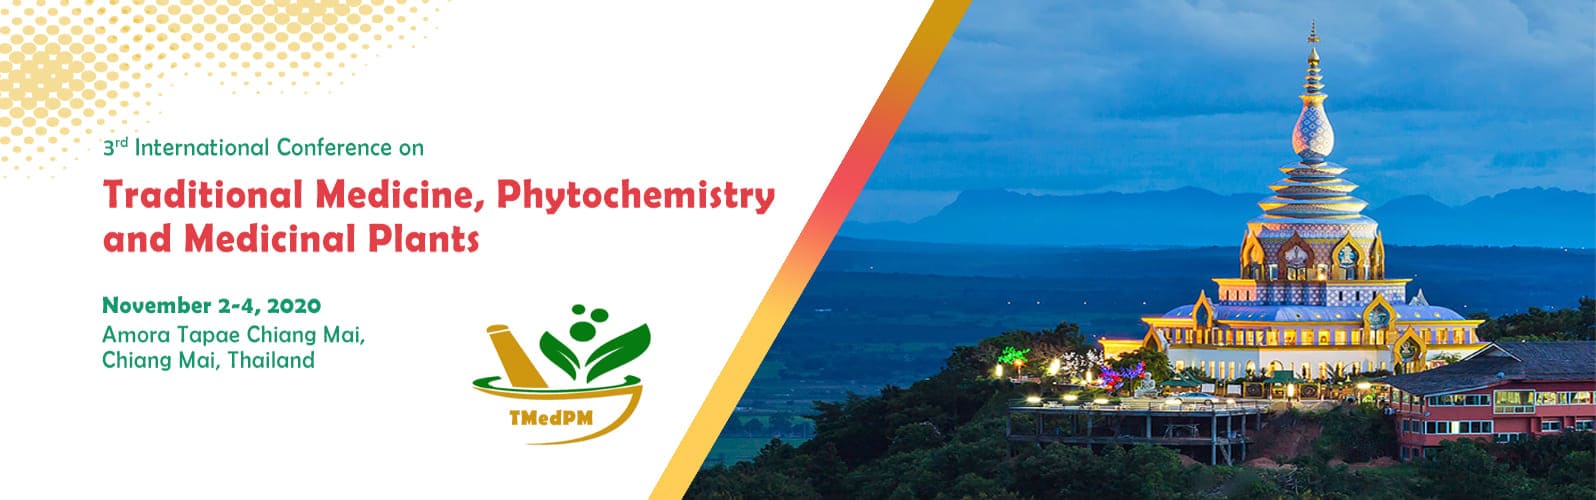 3rd International Conference on Traditional Medicine, Phytochemistry and Medicinal Plants (TMedPM-2020), Chiang Mai, Thailand